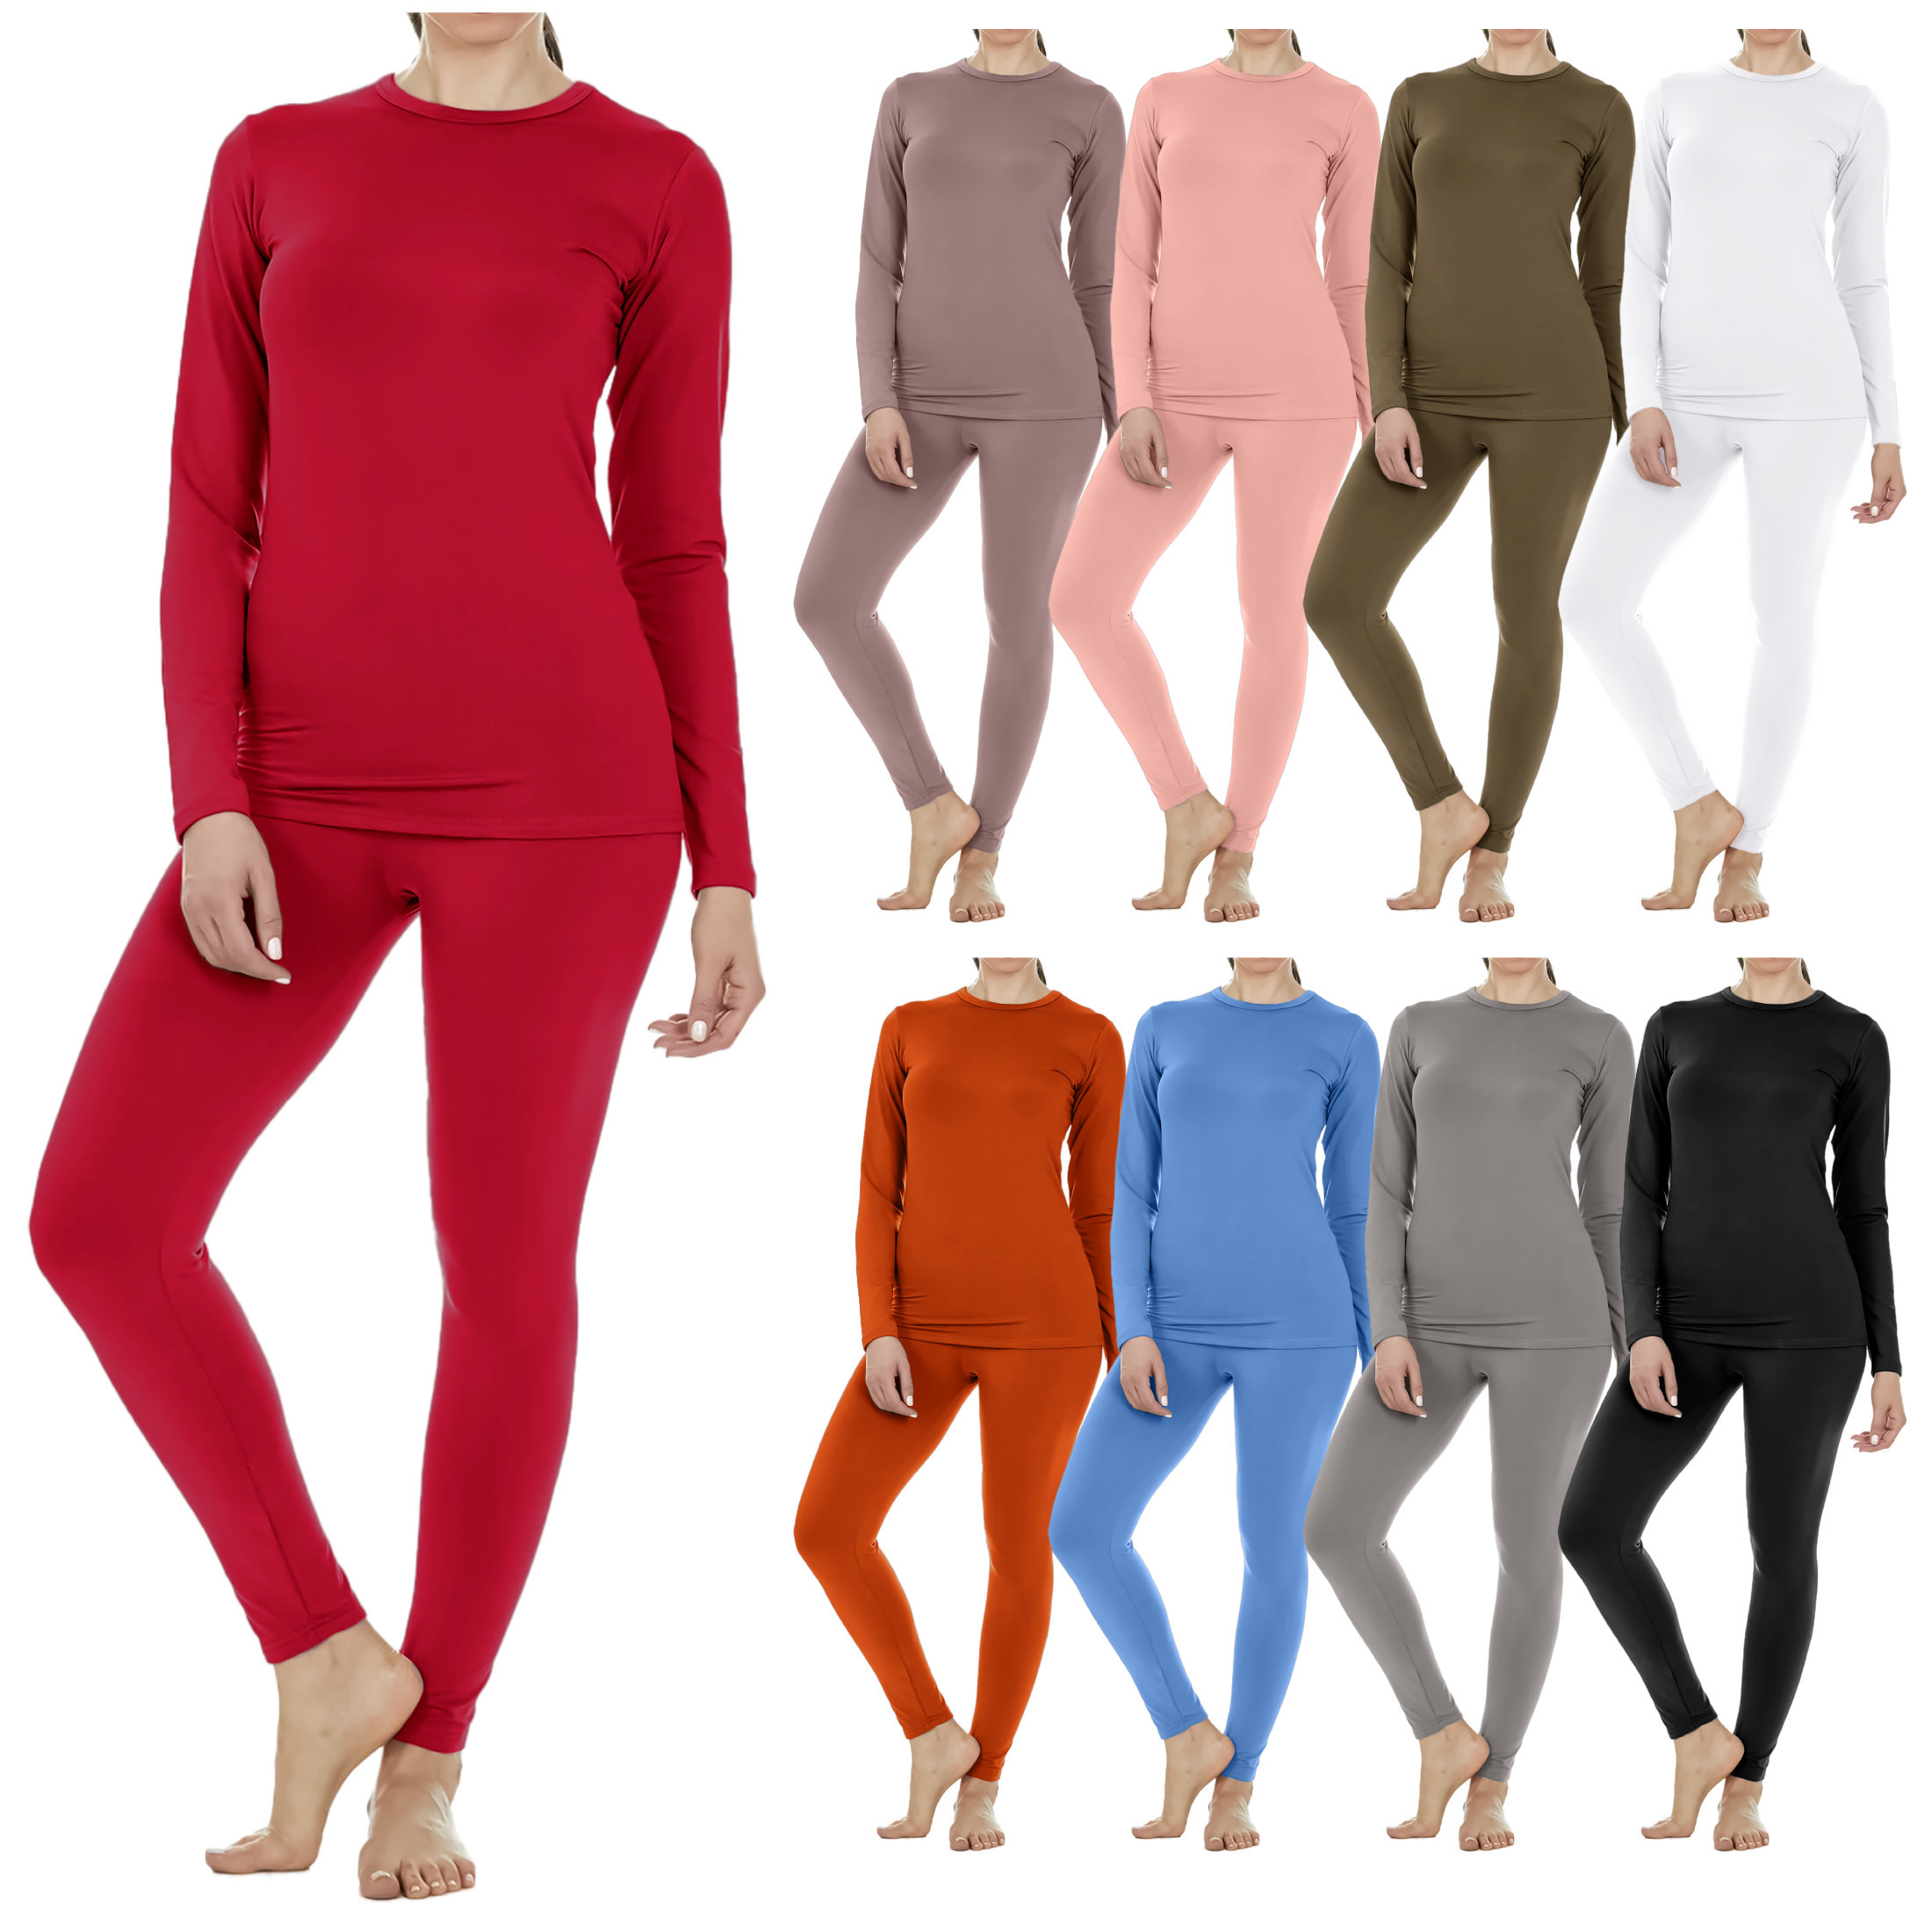 3 Sets: Women's Fleece Lined Thermal Sets For Cold Weather - X-Large